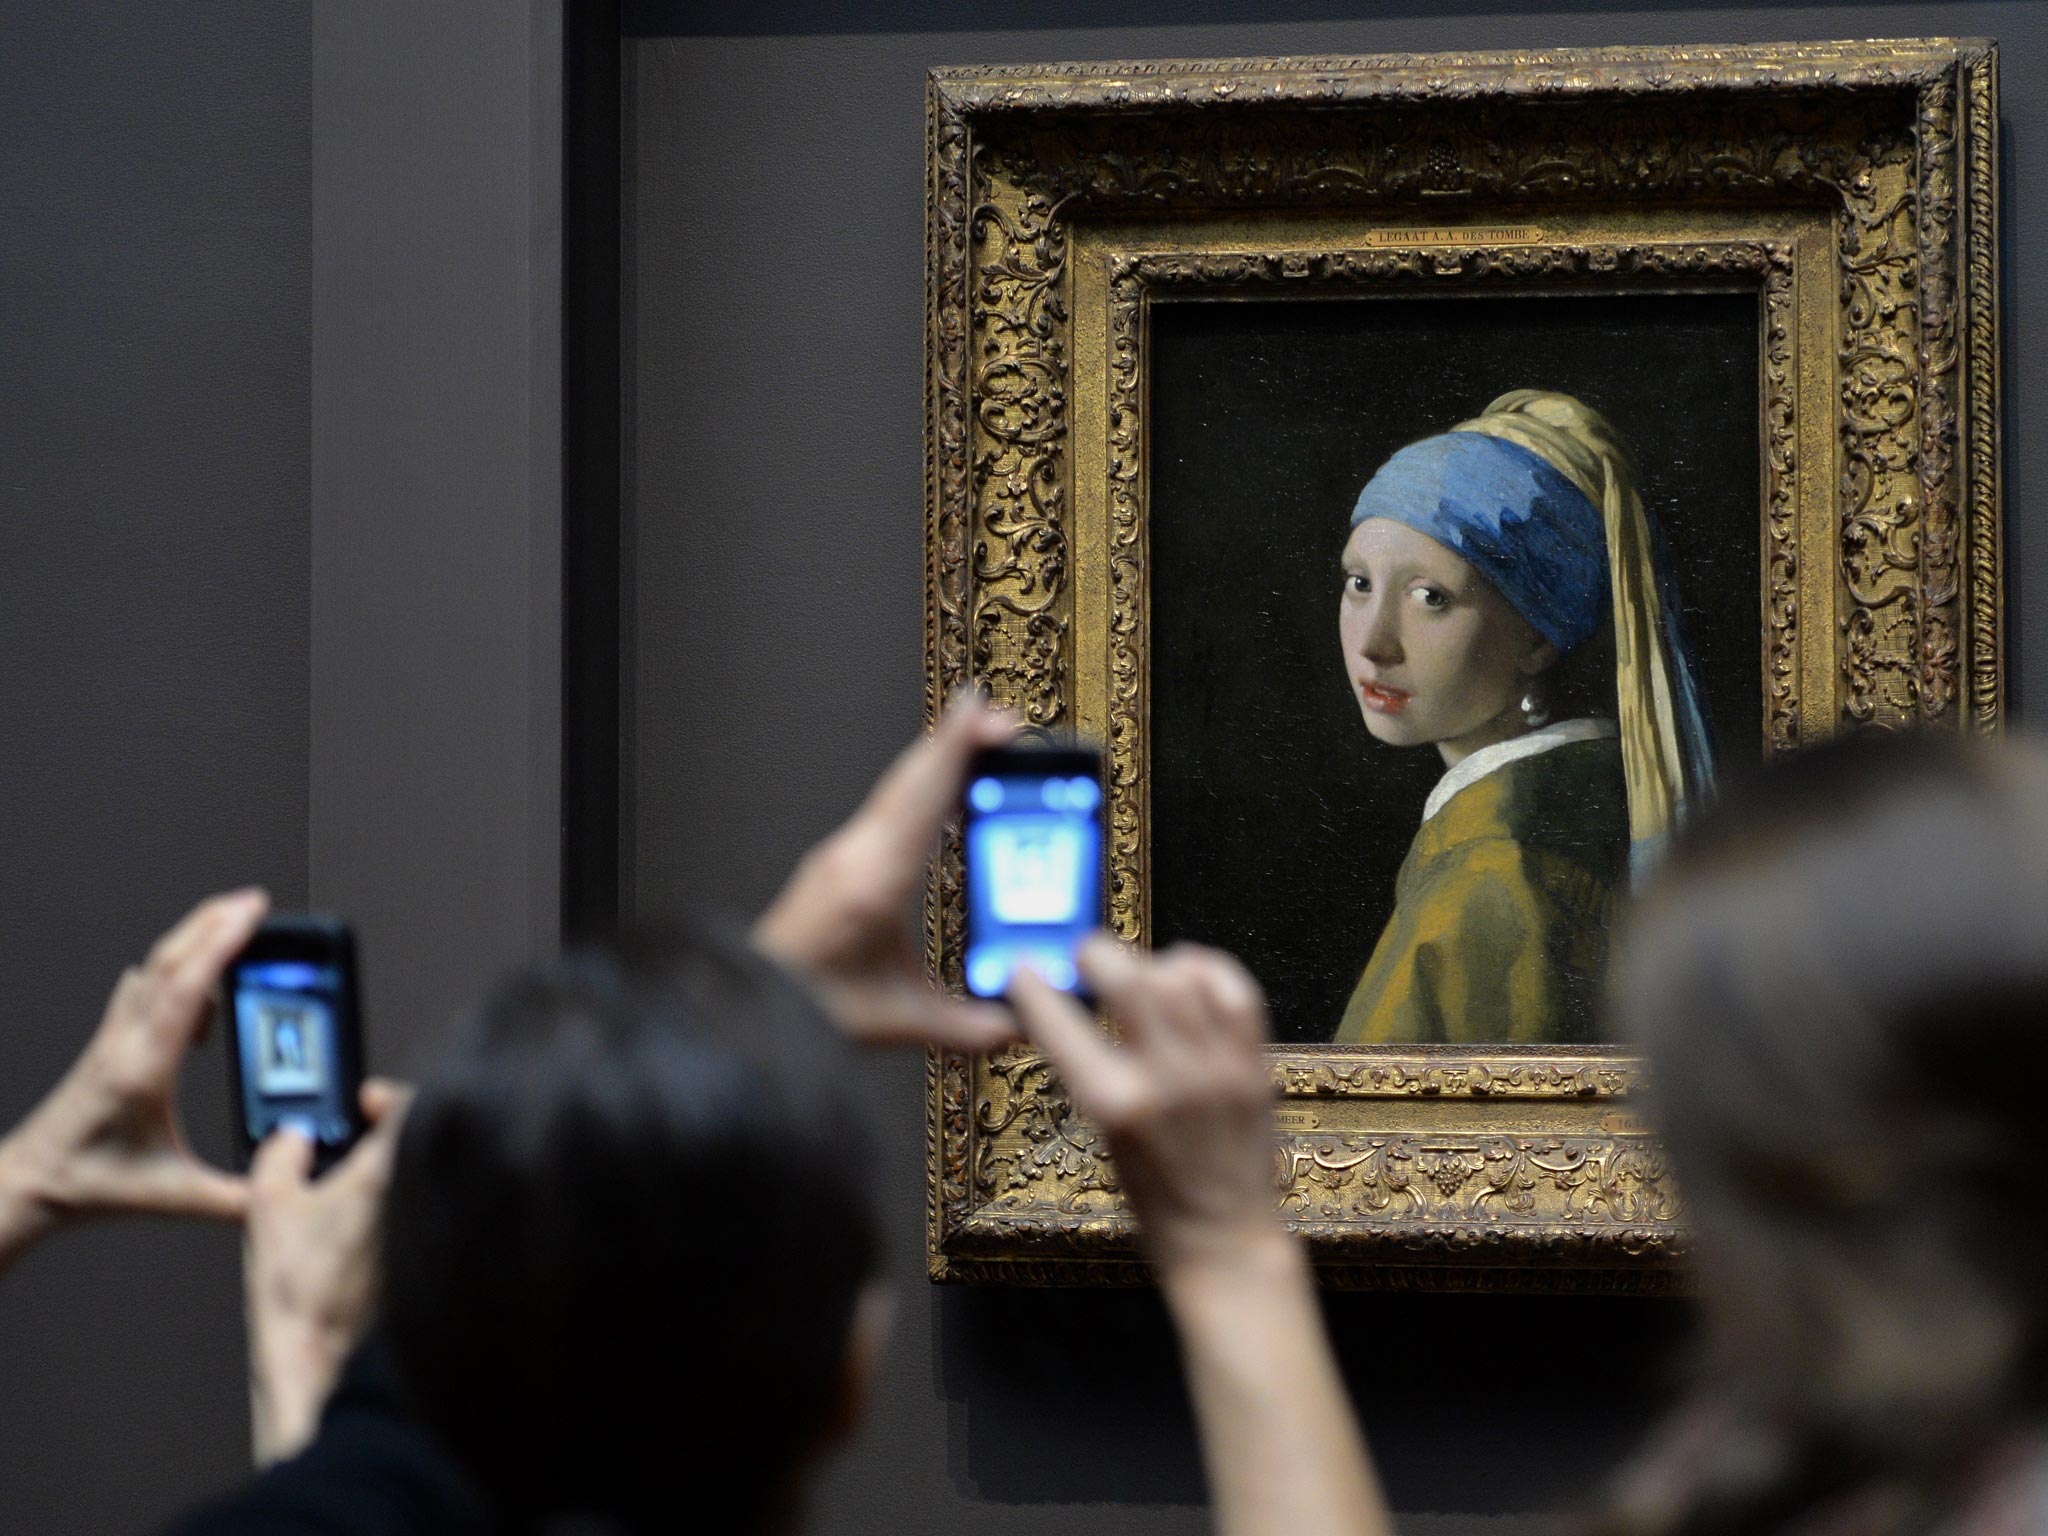 Girl with a Pearl Earring teaches us about how to deal with lust